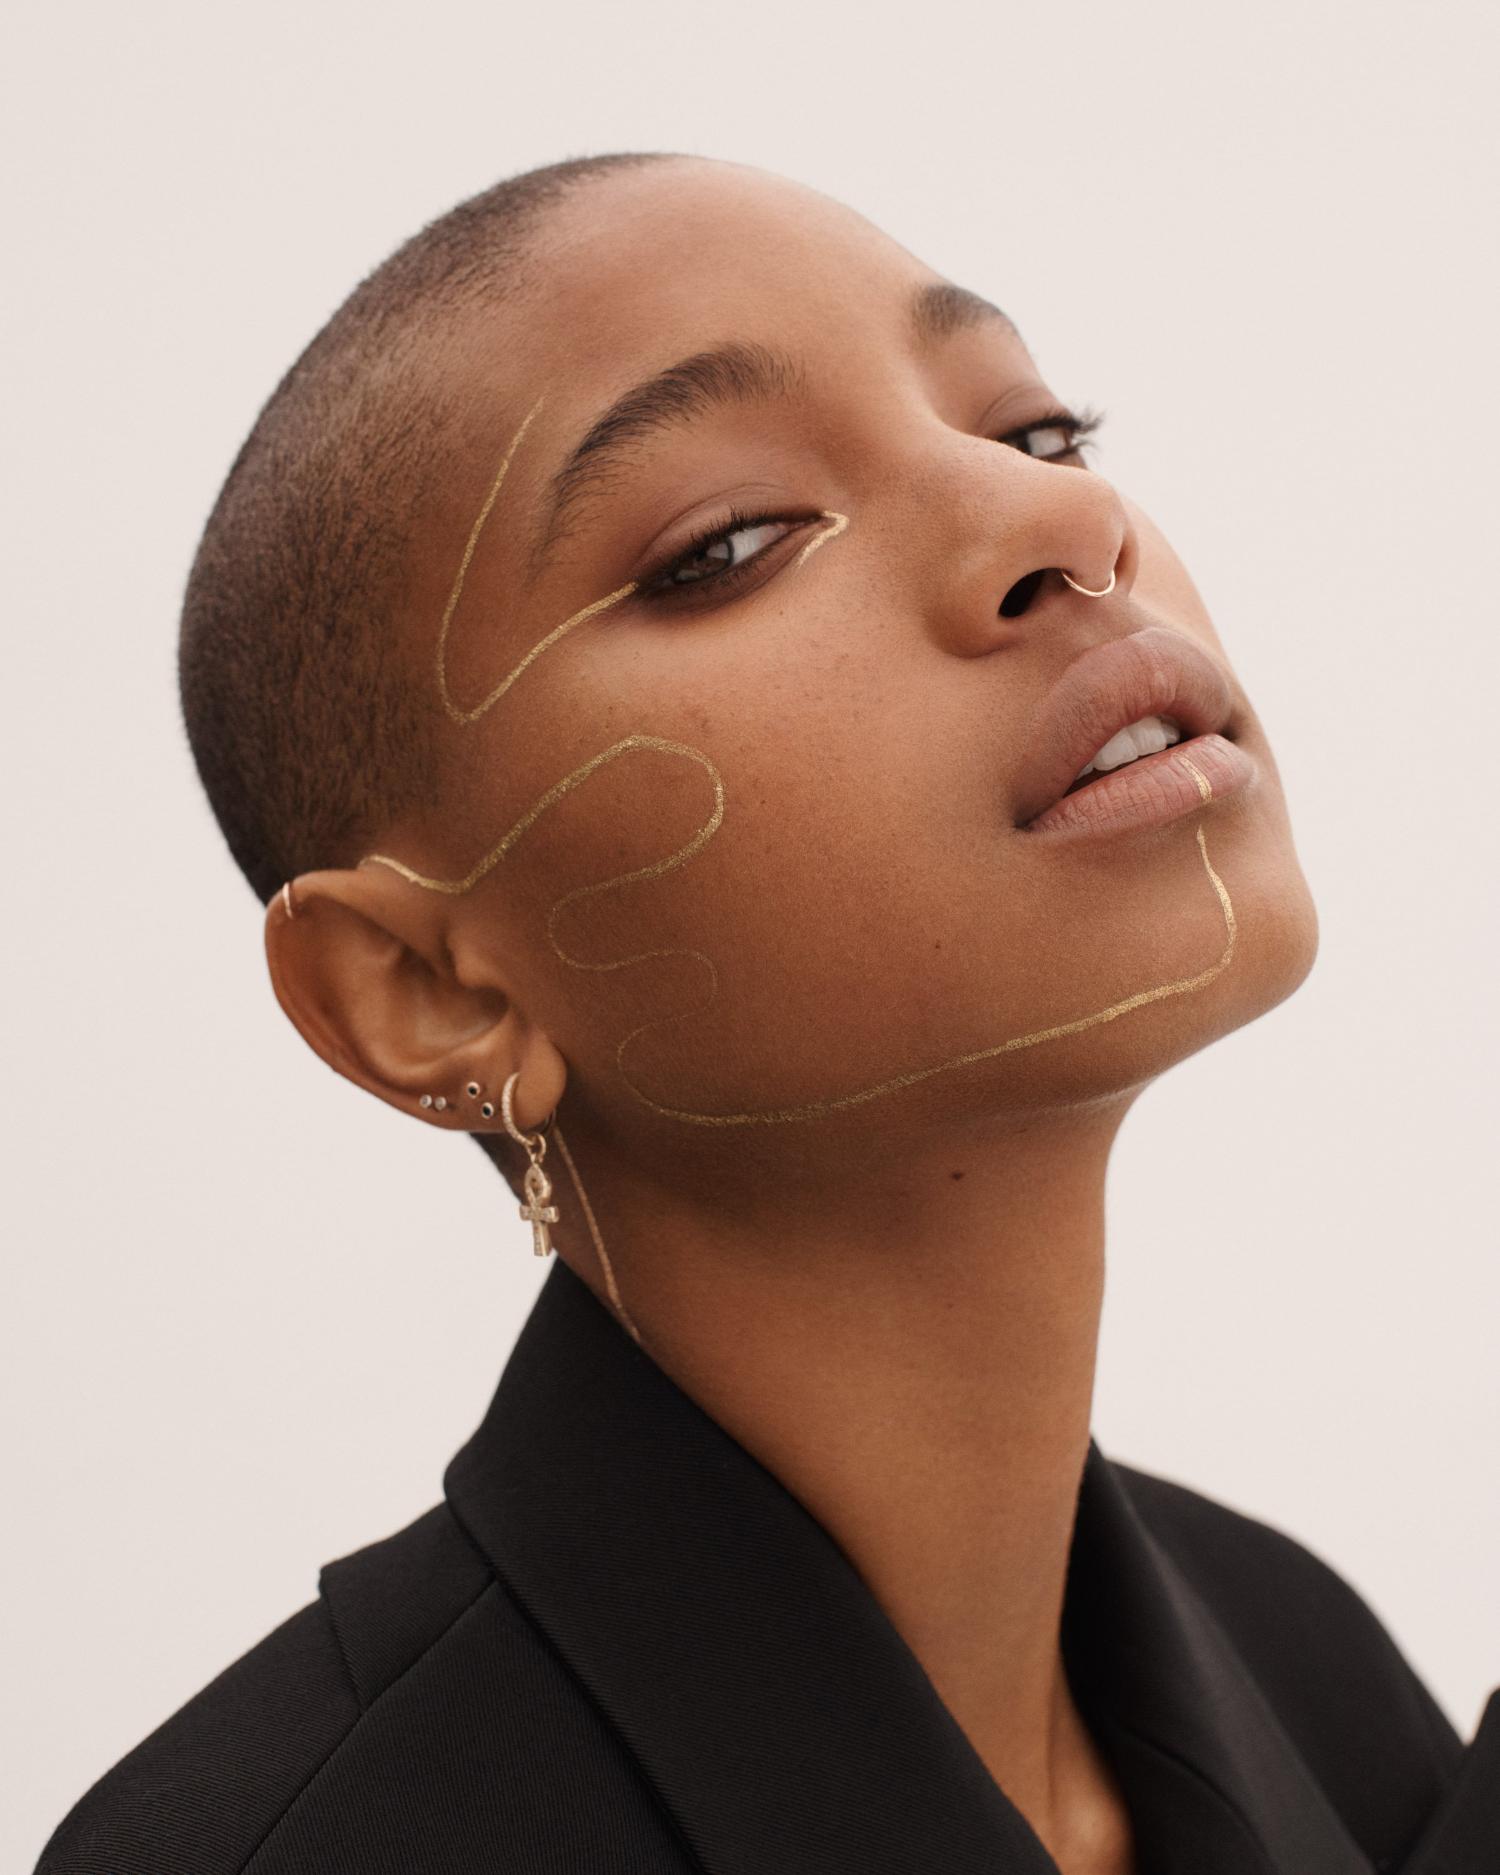 Willow Smith in Mugler by Paola Kudacki for Elle France December 2021